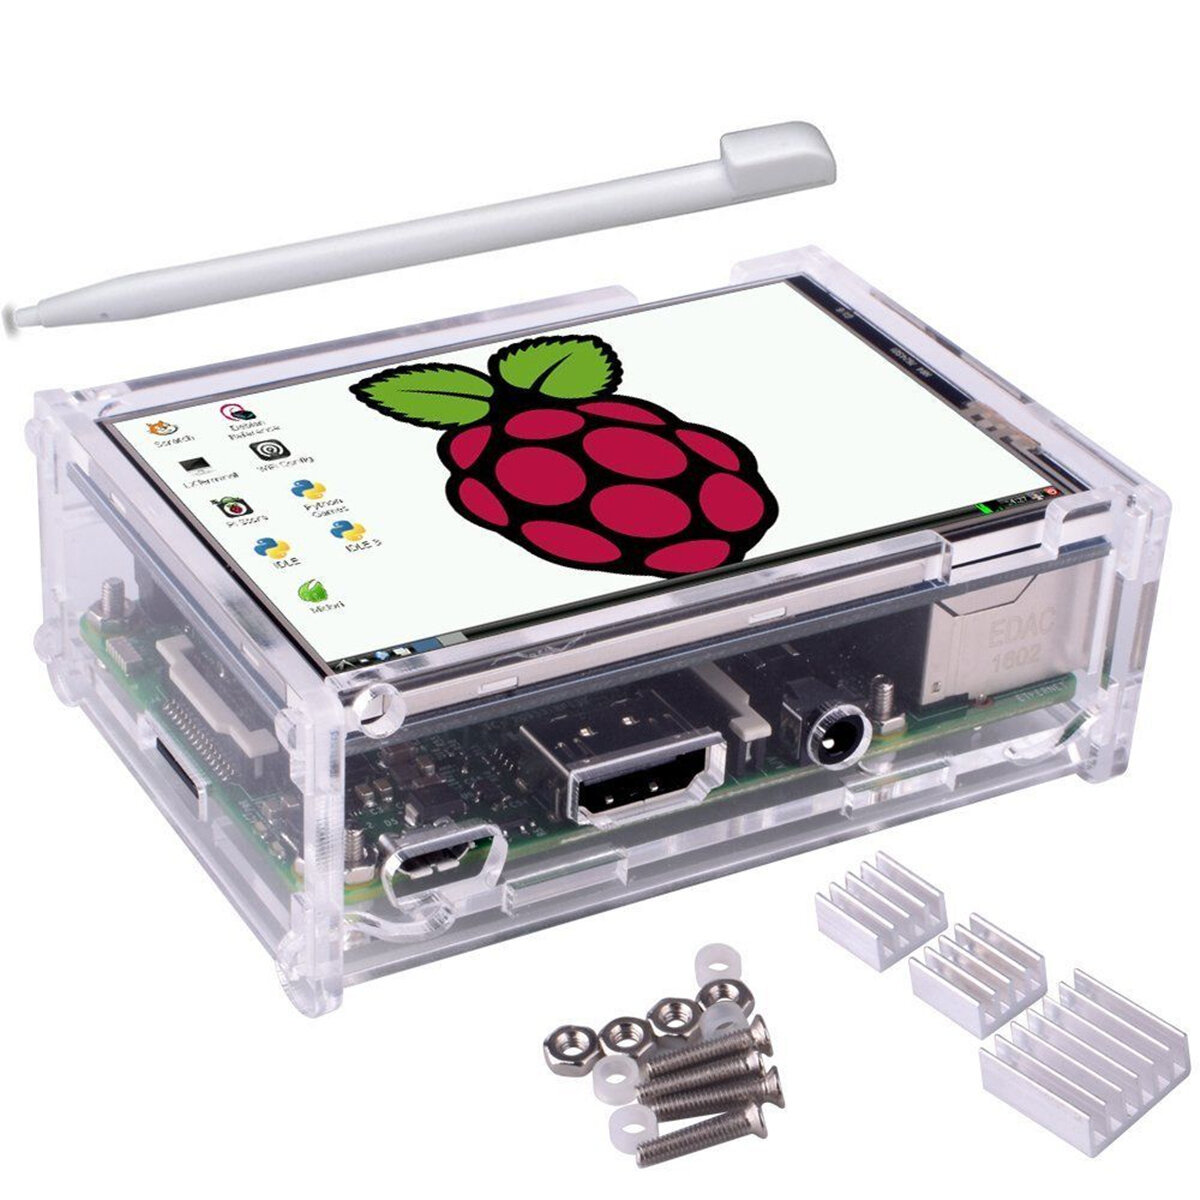 3.5 LCD TFT Touch Screen Display for Raspberry Pi 2 Pi 3 Model B Board Case